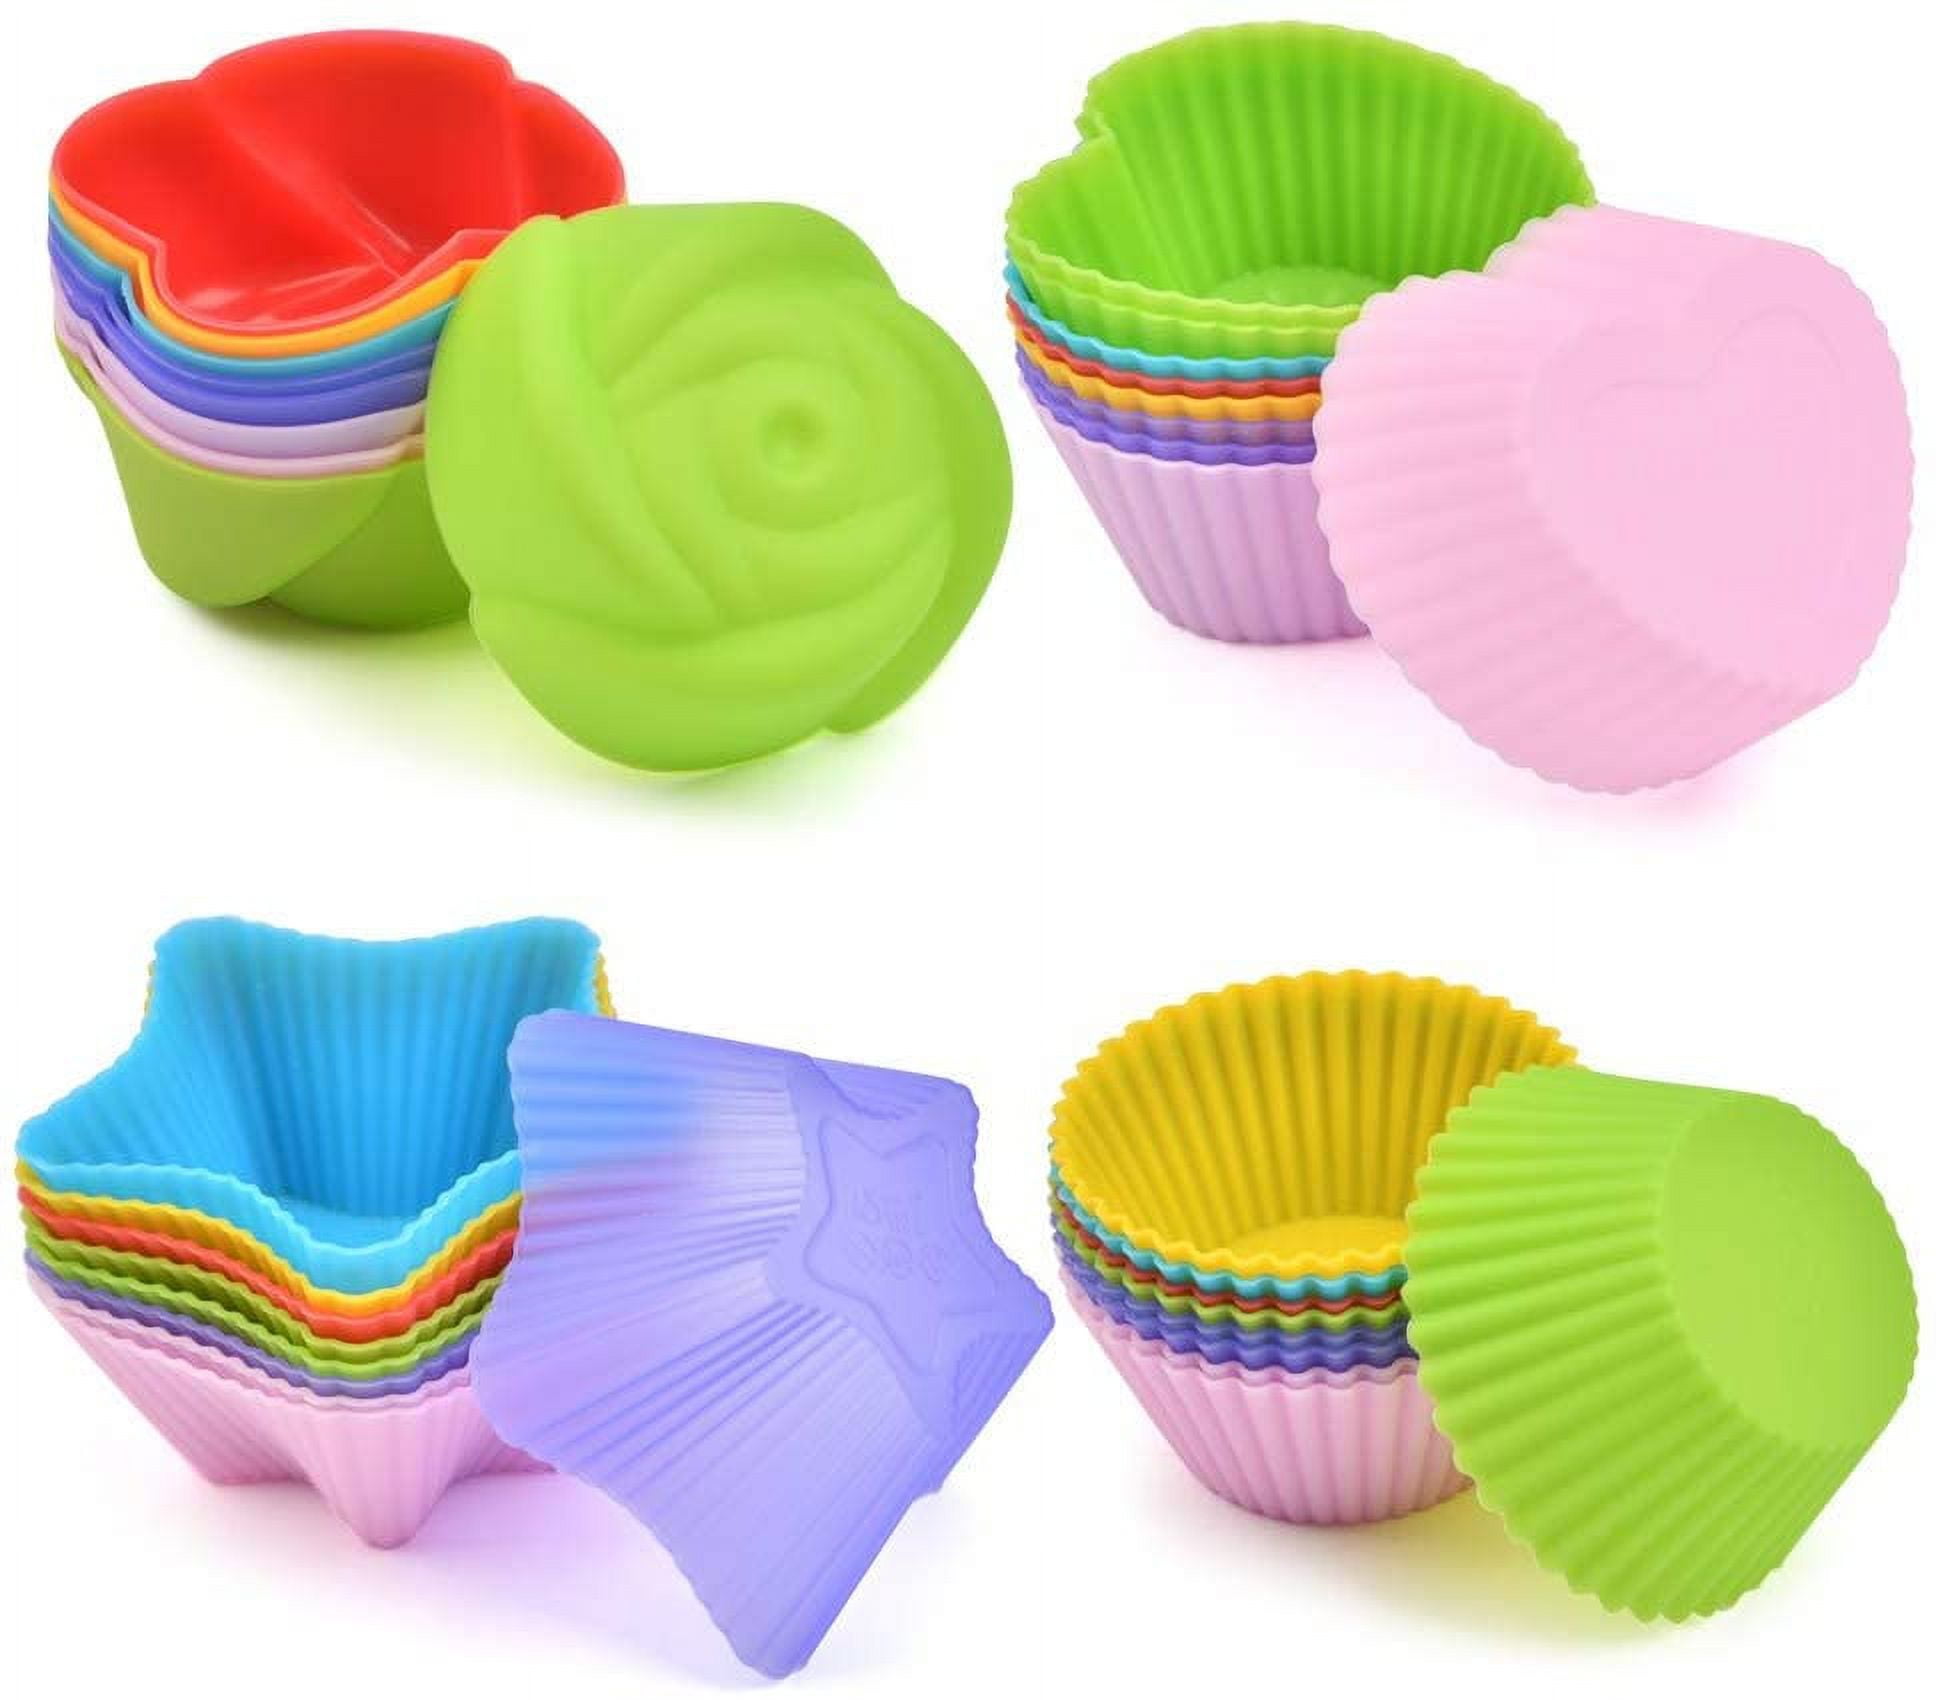 Food Grade Silicone Mold Pleated Plain Color Muffin Cake Baking